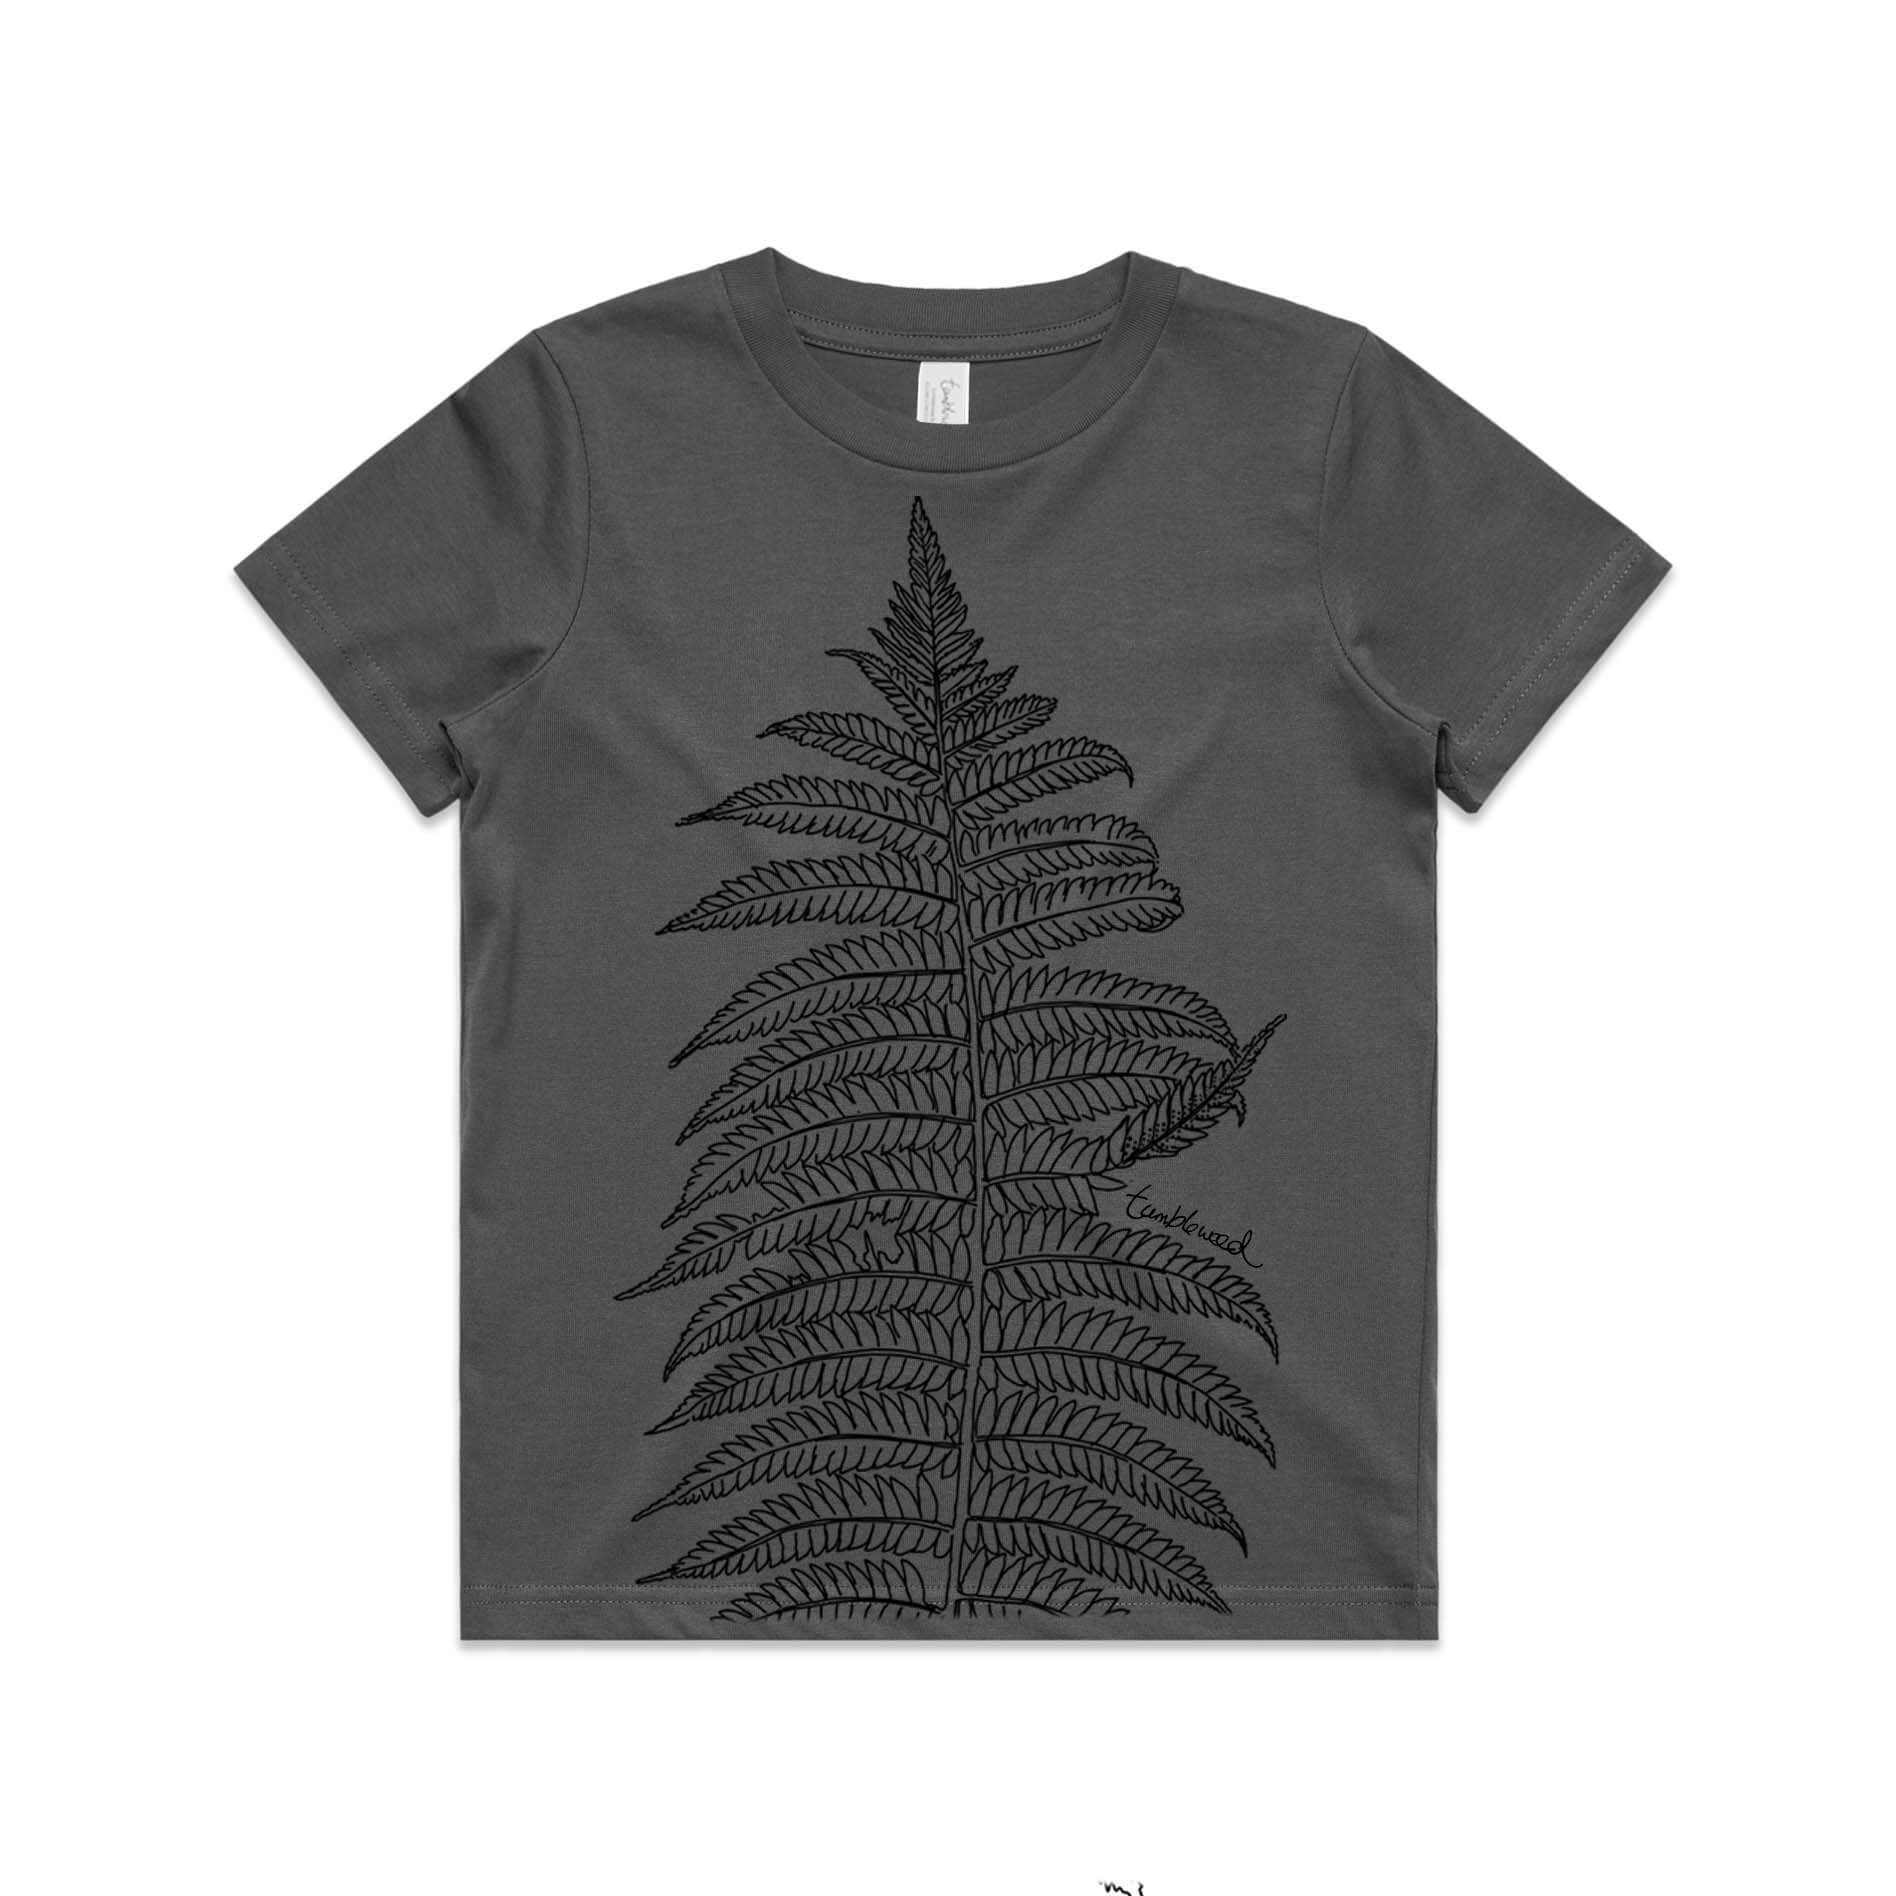 Charcoal, cotton kids' t-shirt with screen printed Silver fern/ponga design.